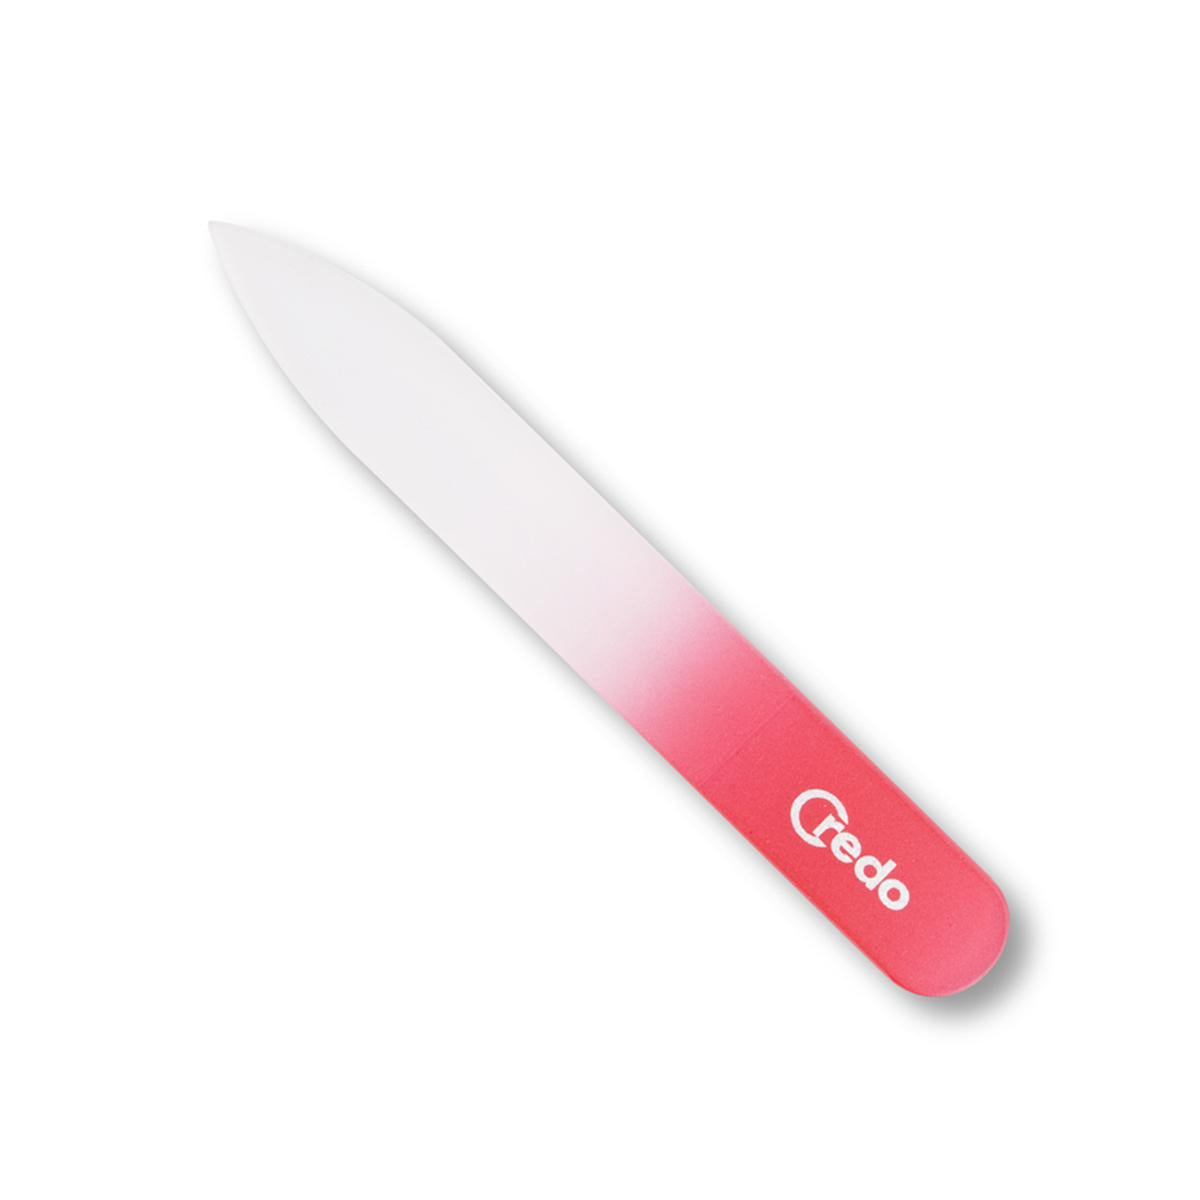 Primary image of Credo Small Pink Glass Nail File 90mm Nail File